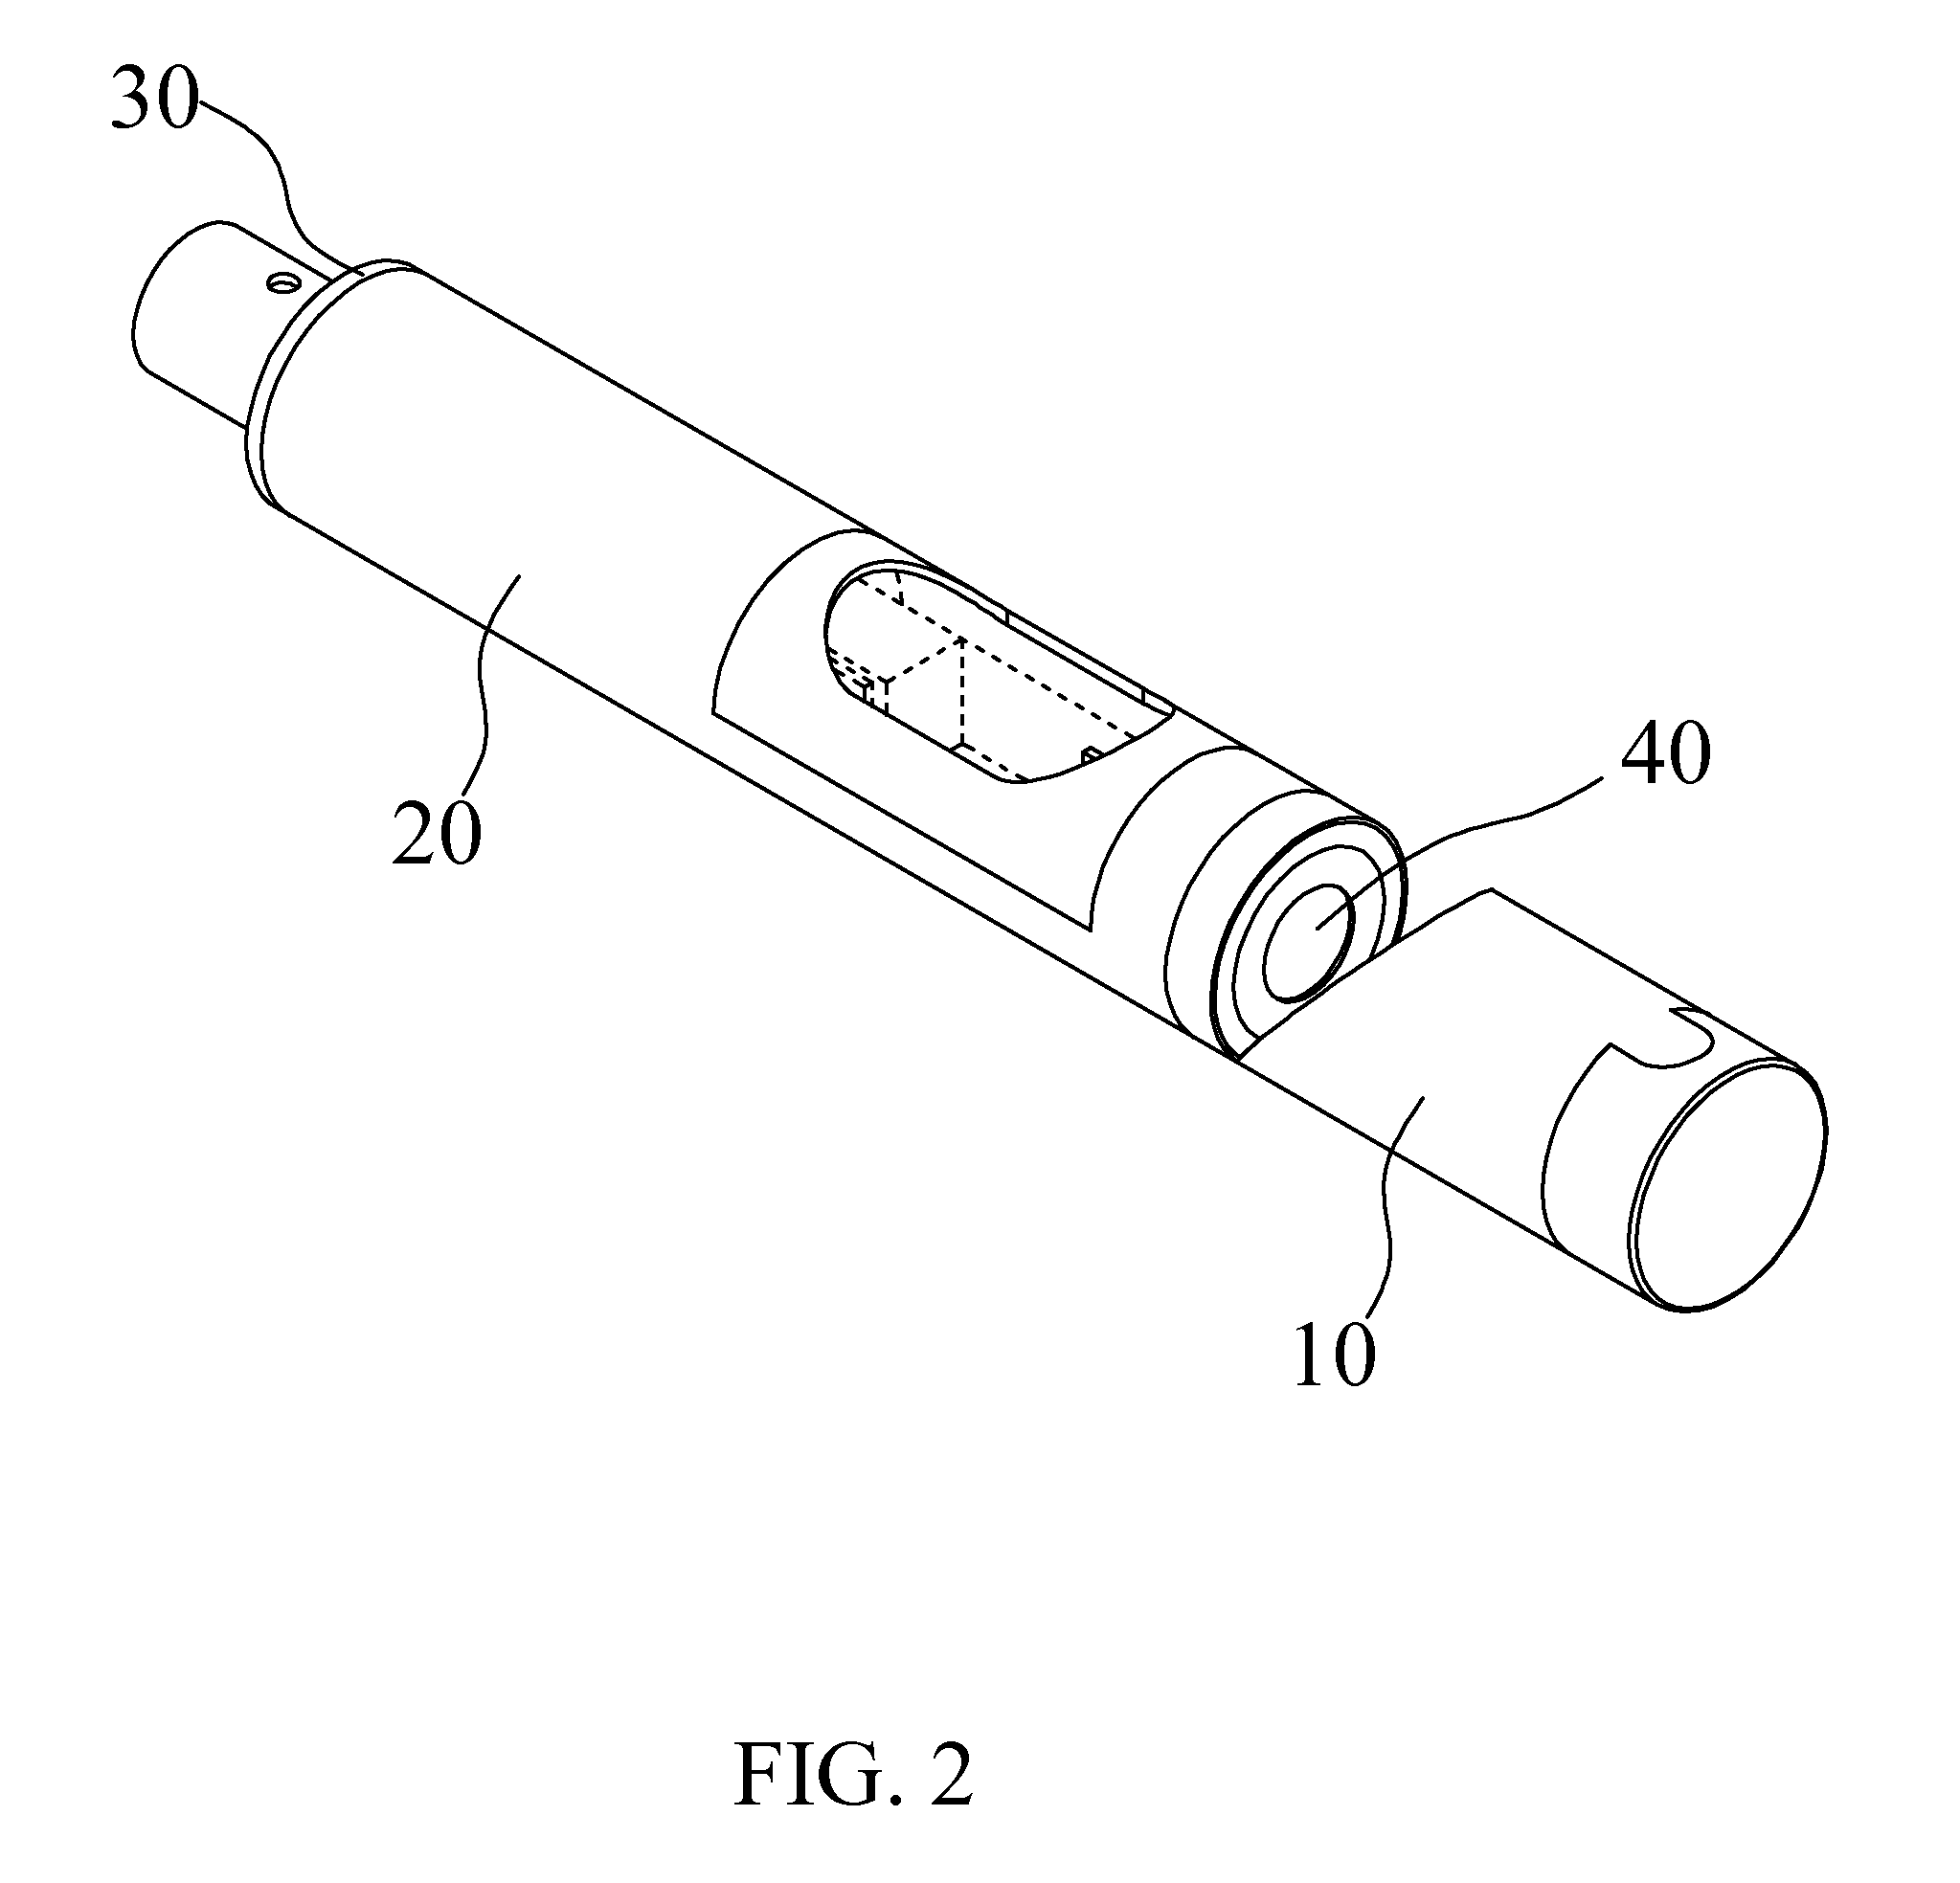 Side-viewing endoscope structure